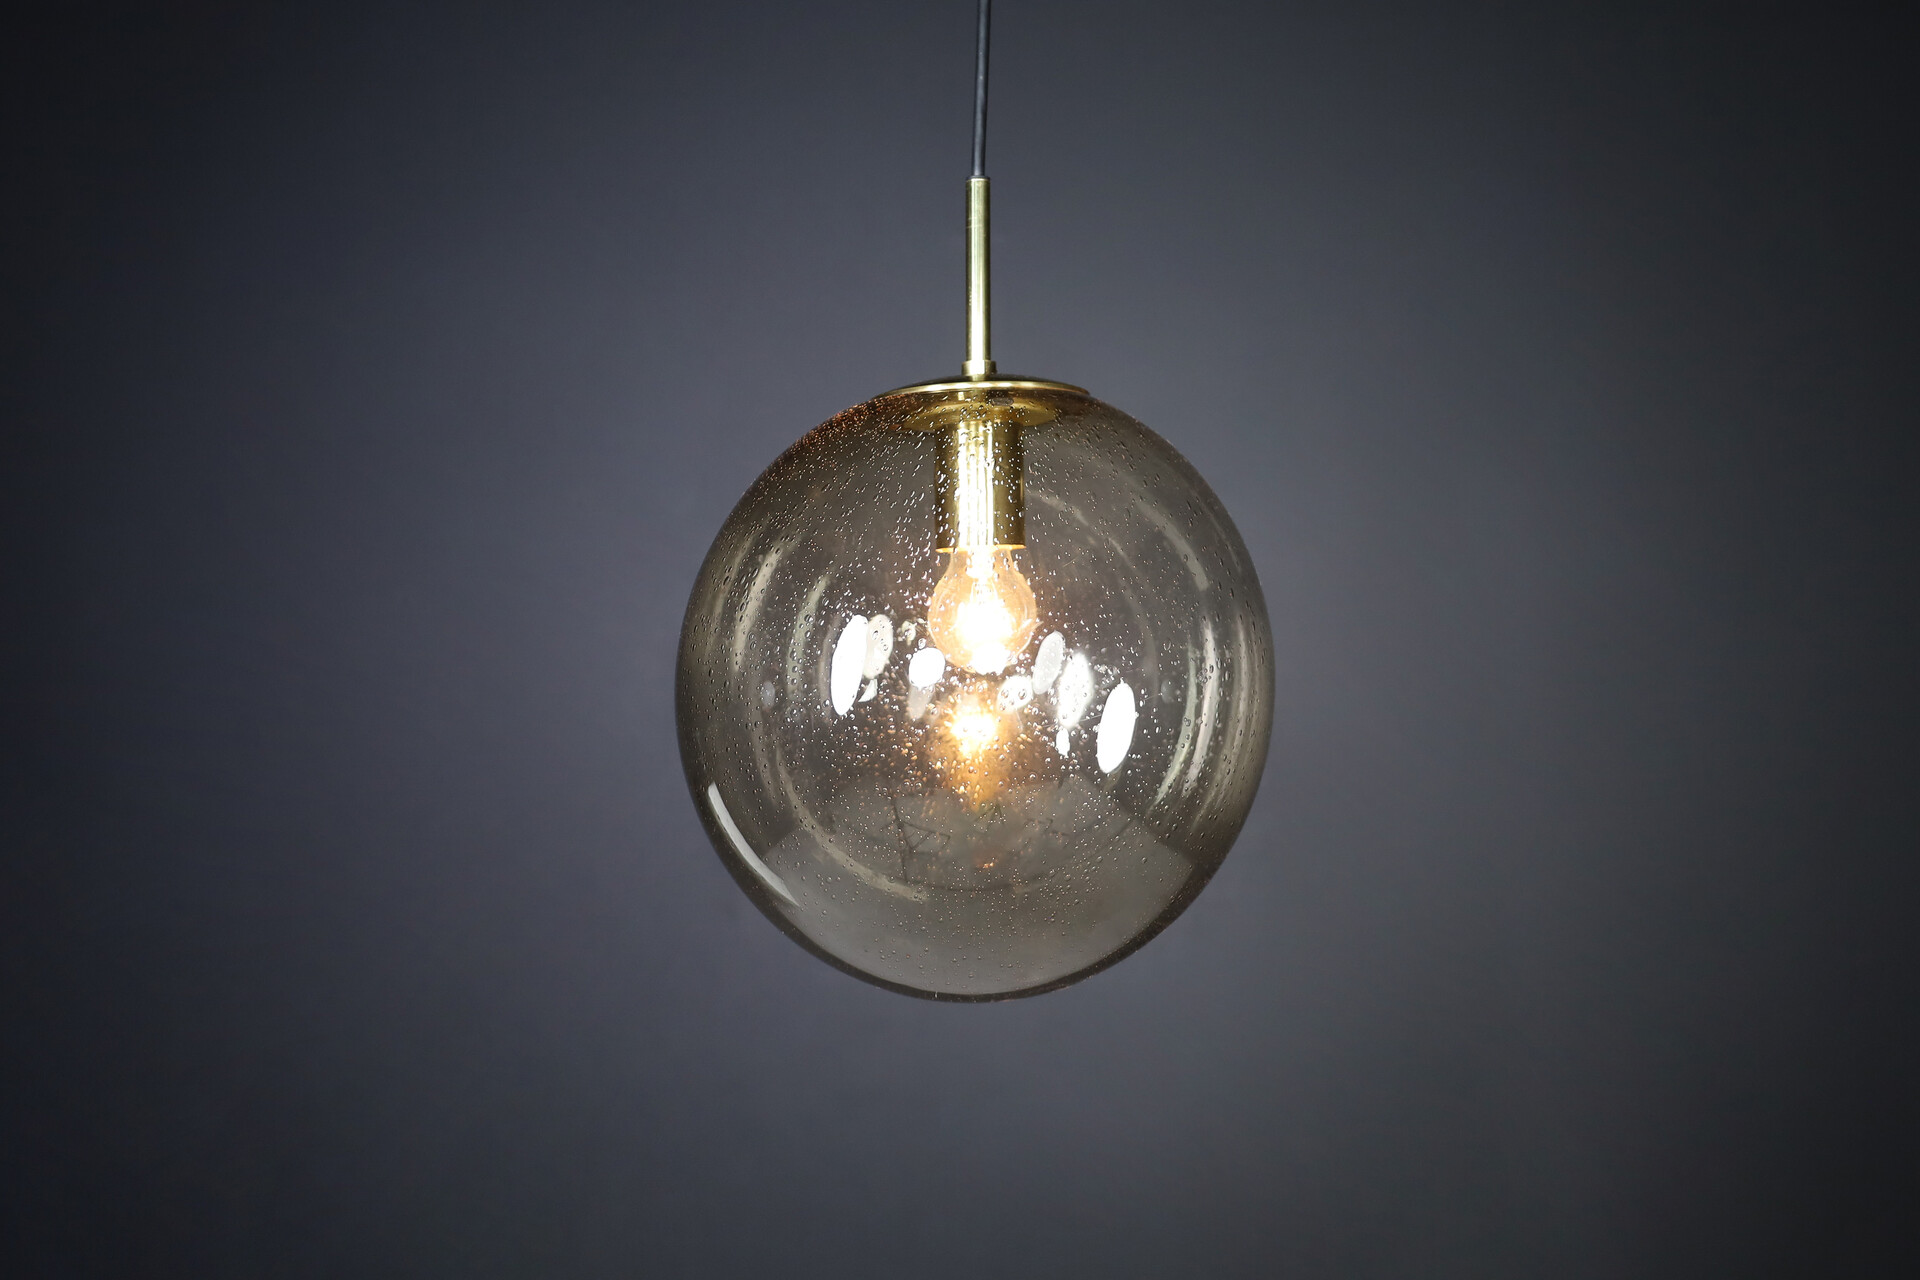 Mid century modern Smoked buble glass and brass Pendant, Germany 1960s Mid-20th century